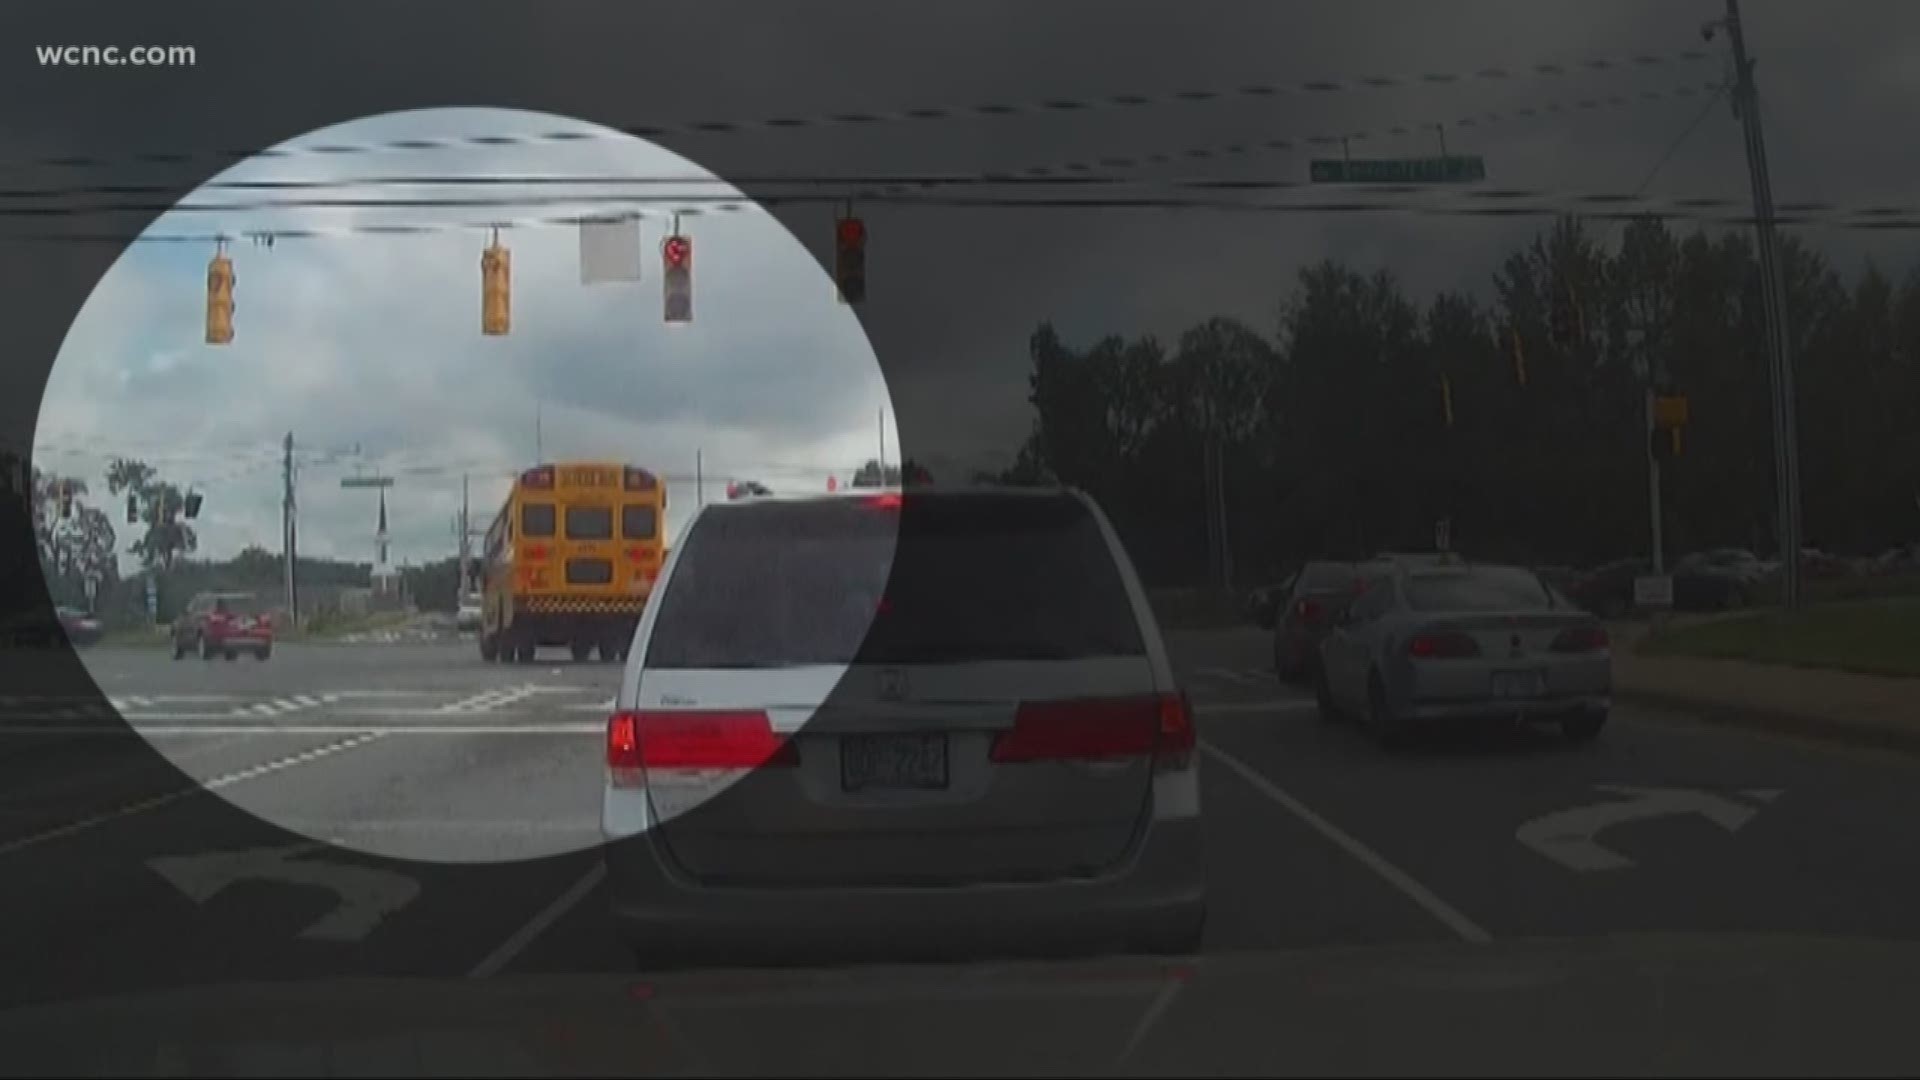 An engineer says short yellow lights are not only common but also setting drivers up to fail.